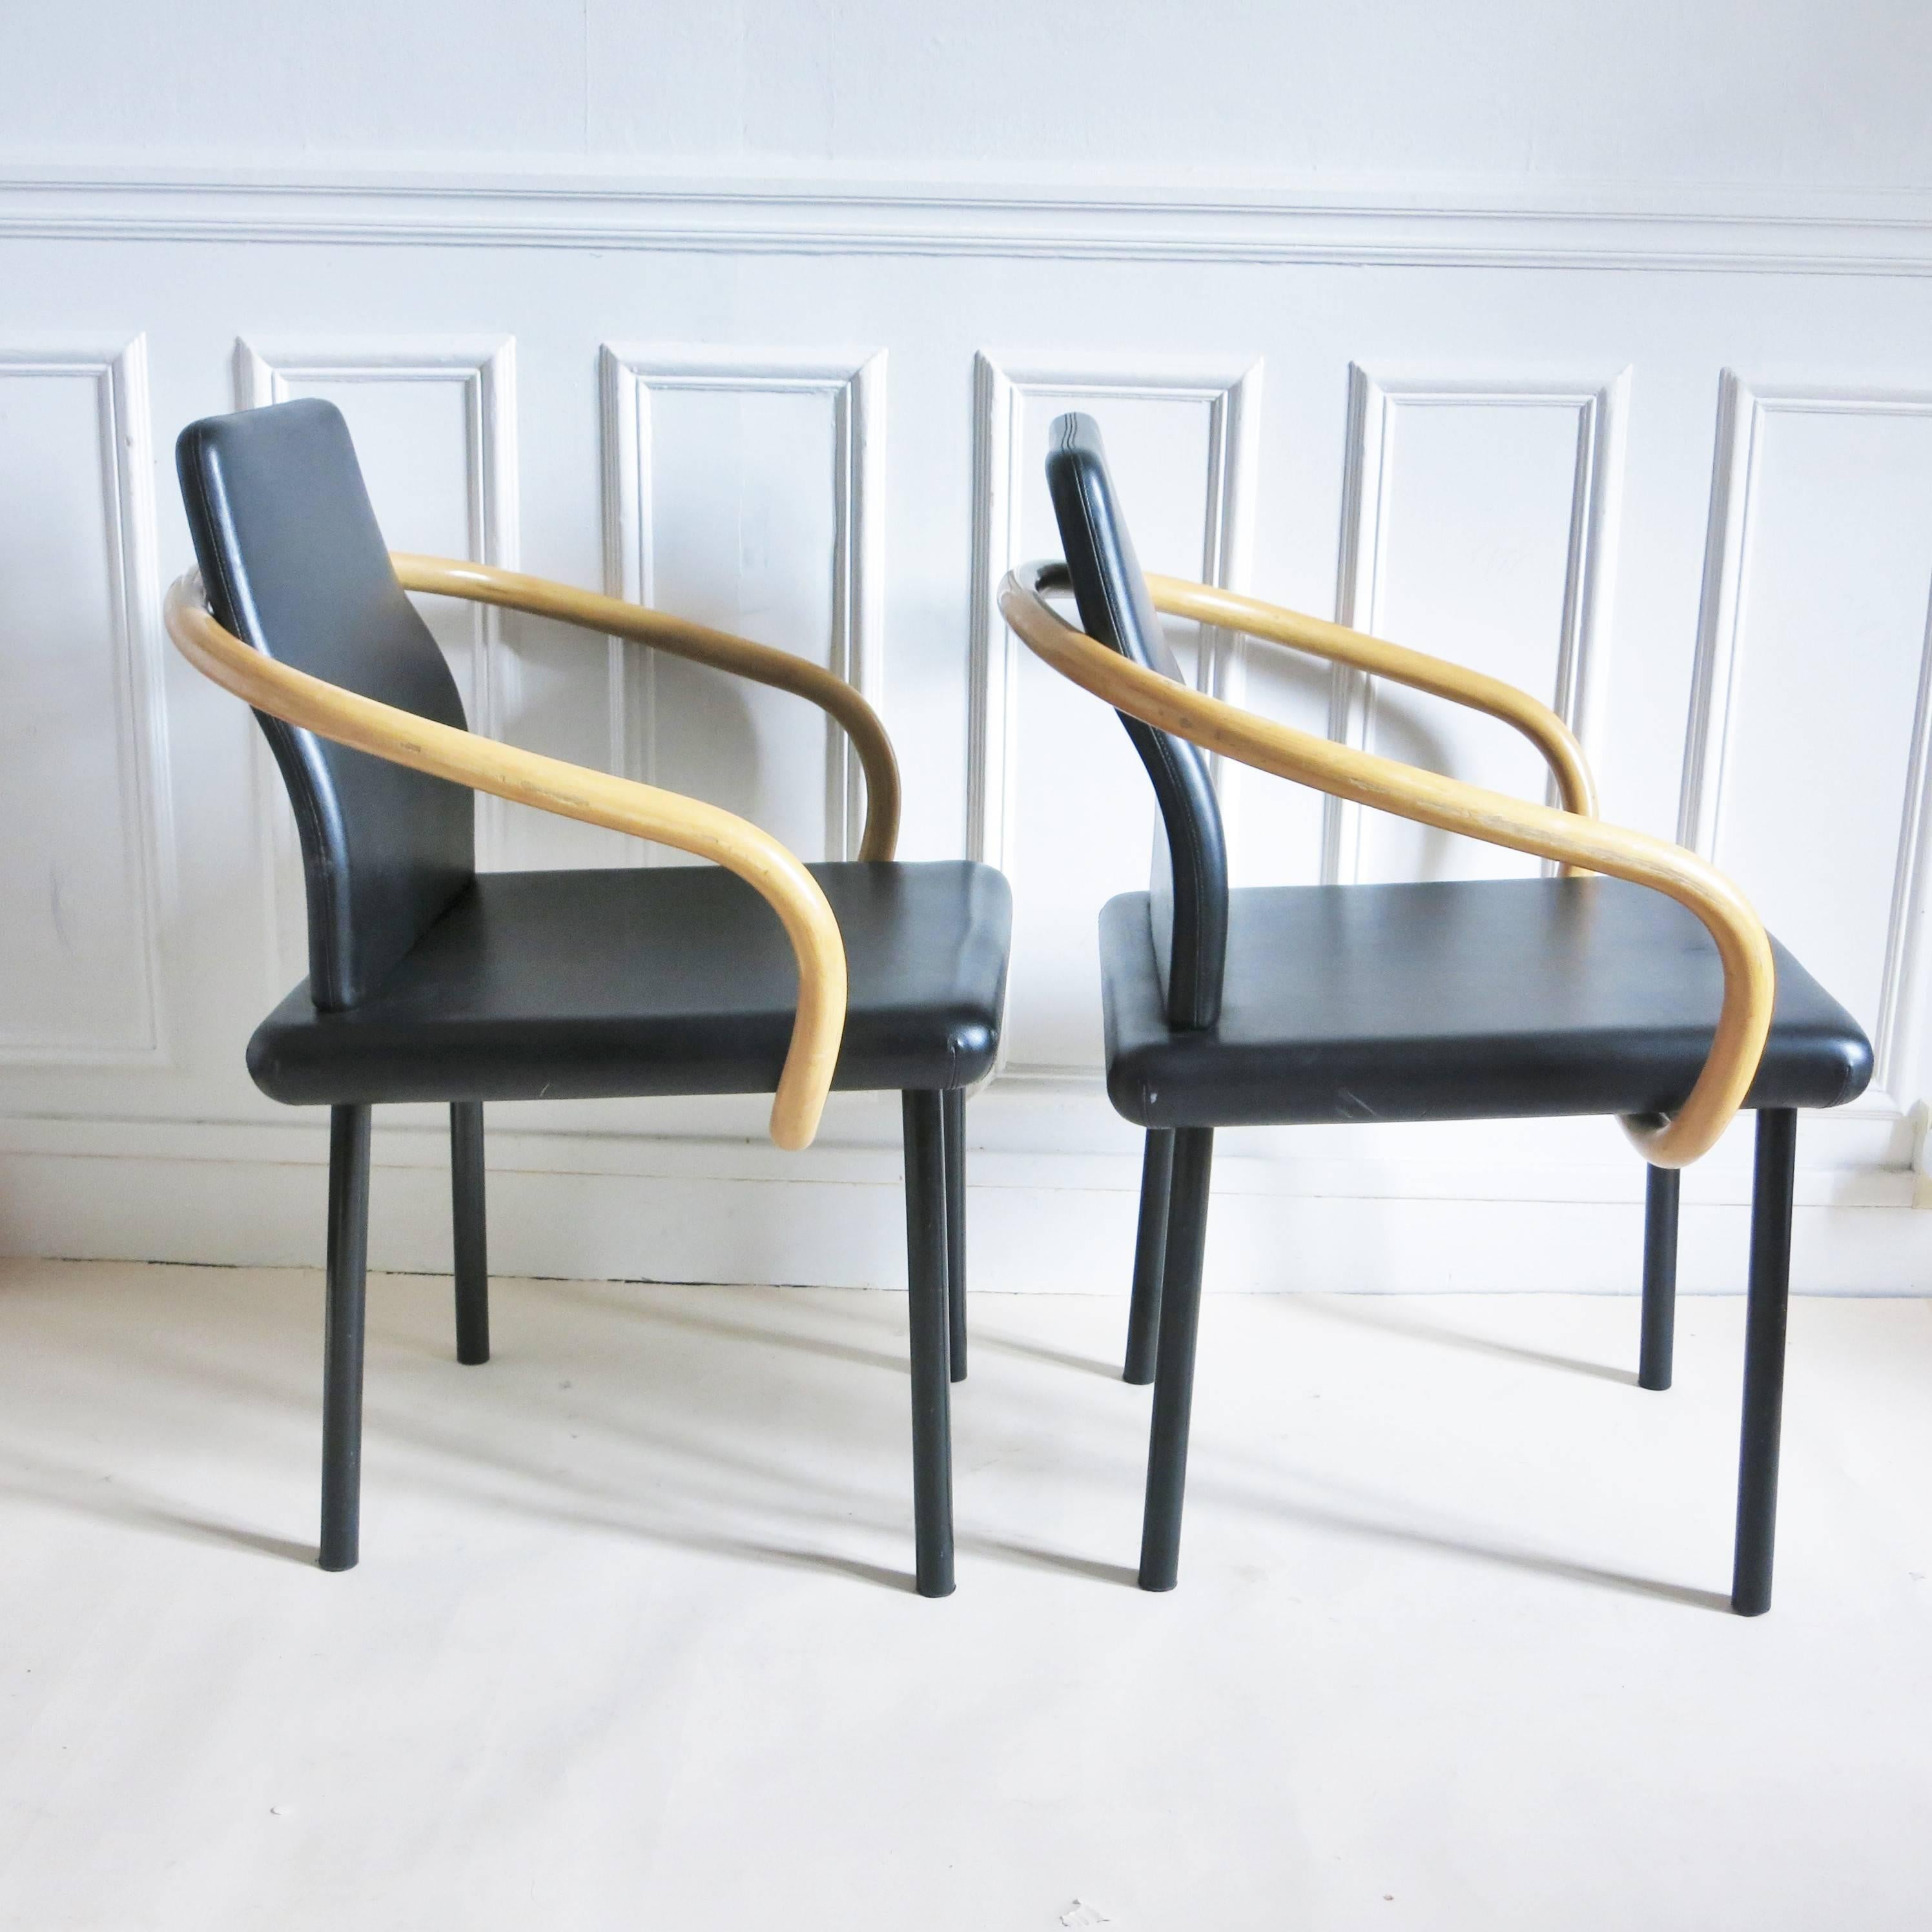 Italian Set of Four Chairs Mandarin by Ettore Sottsass for Knoll